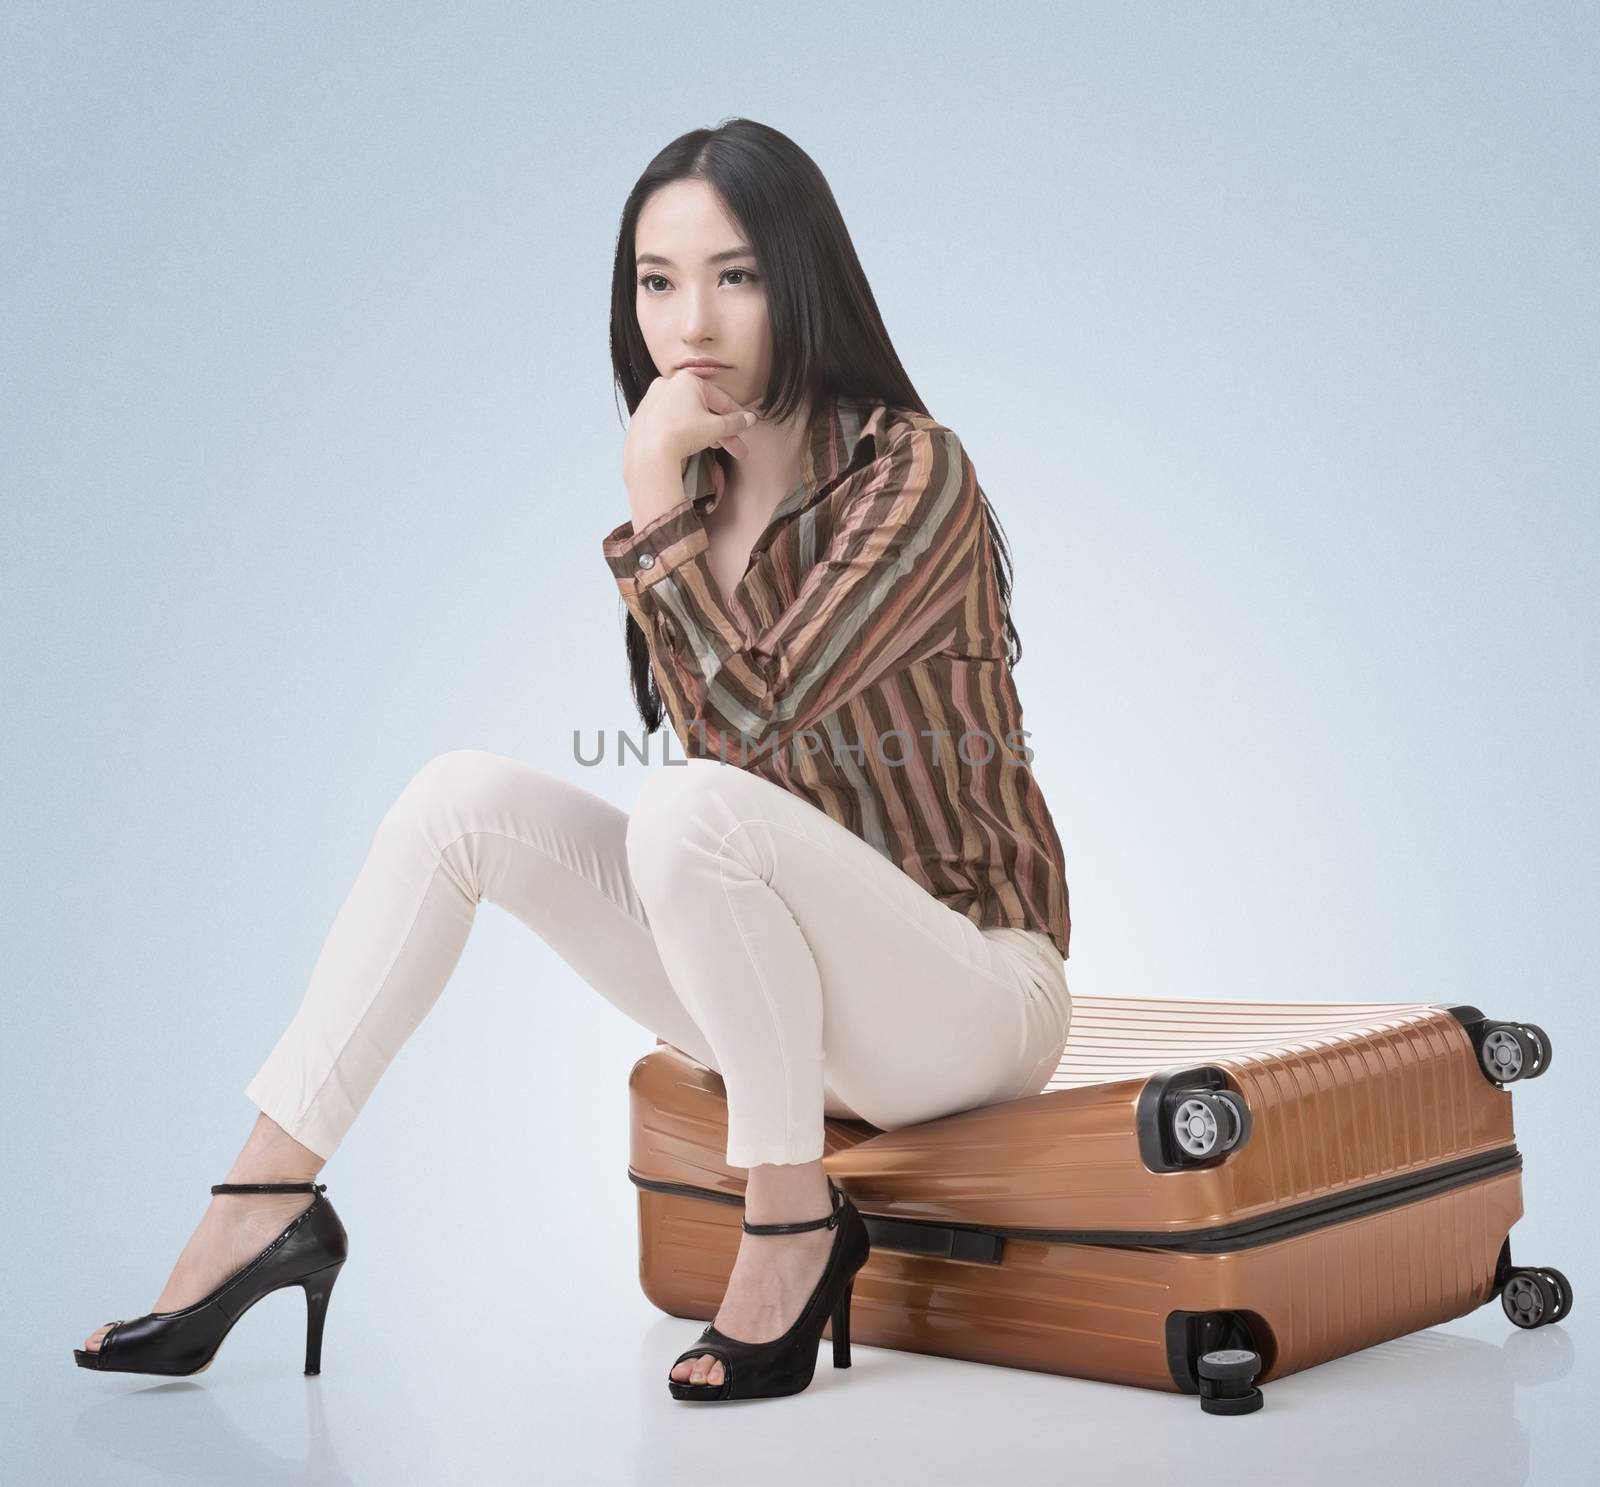 Asian woman thinking and sitting on a luggage in vintage style.